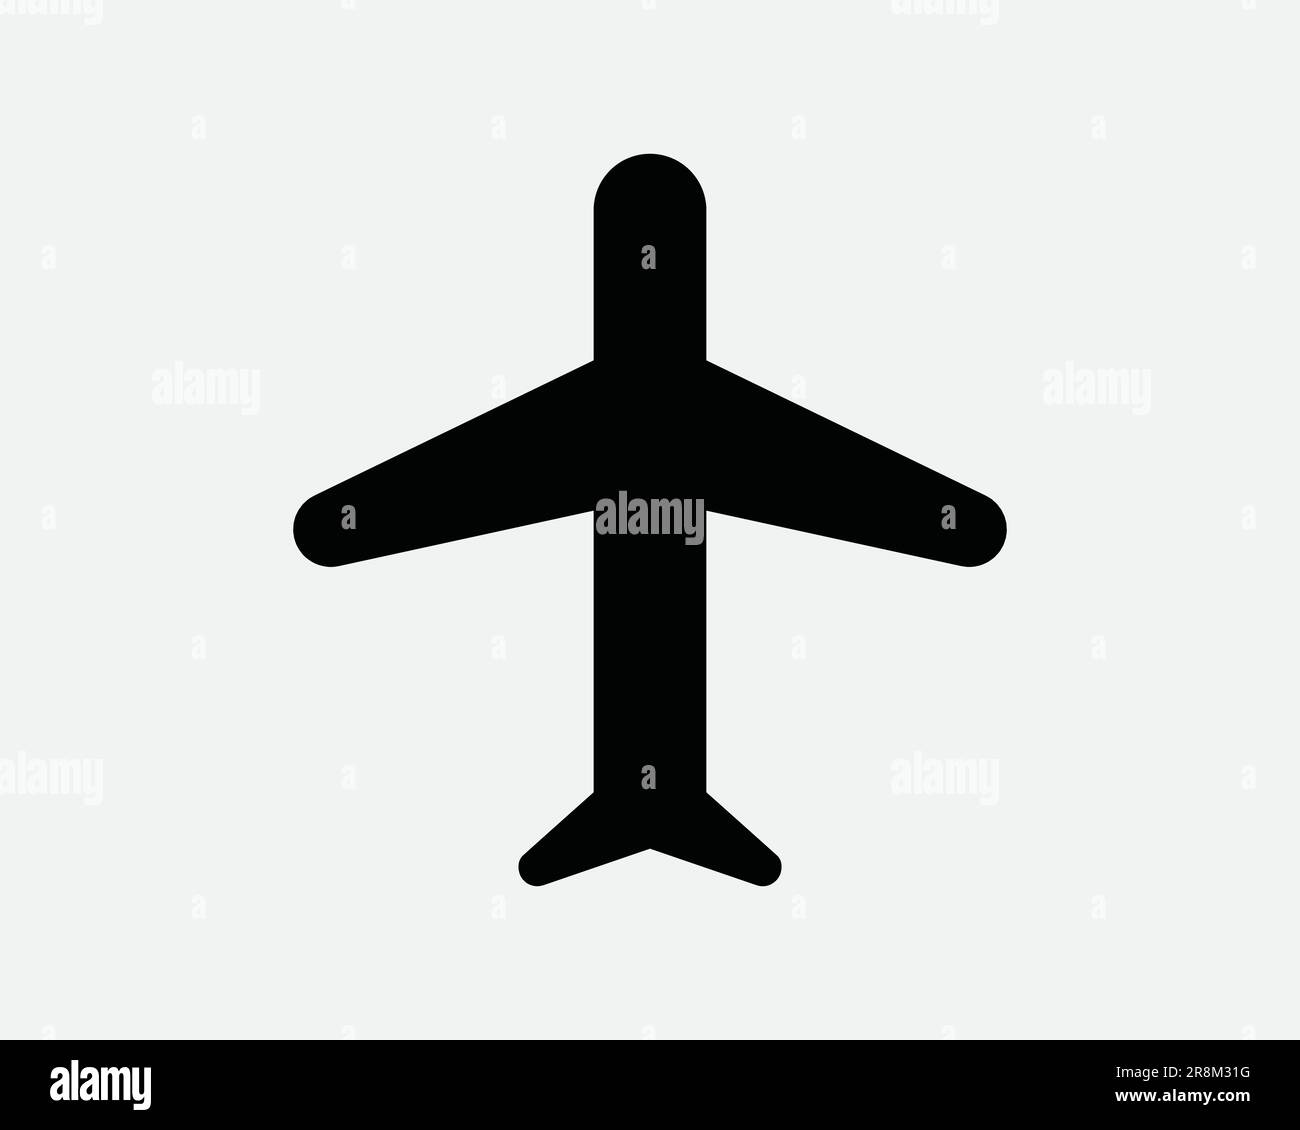 Plane Icon Airport Airplane Aircraft Flight Airline Aviation Jet Travel Black White Sign Symbol Illustration Artwork Graphic Clipart Shape EPS Vector Stock Vector